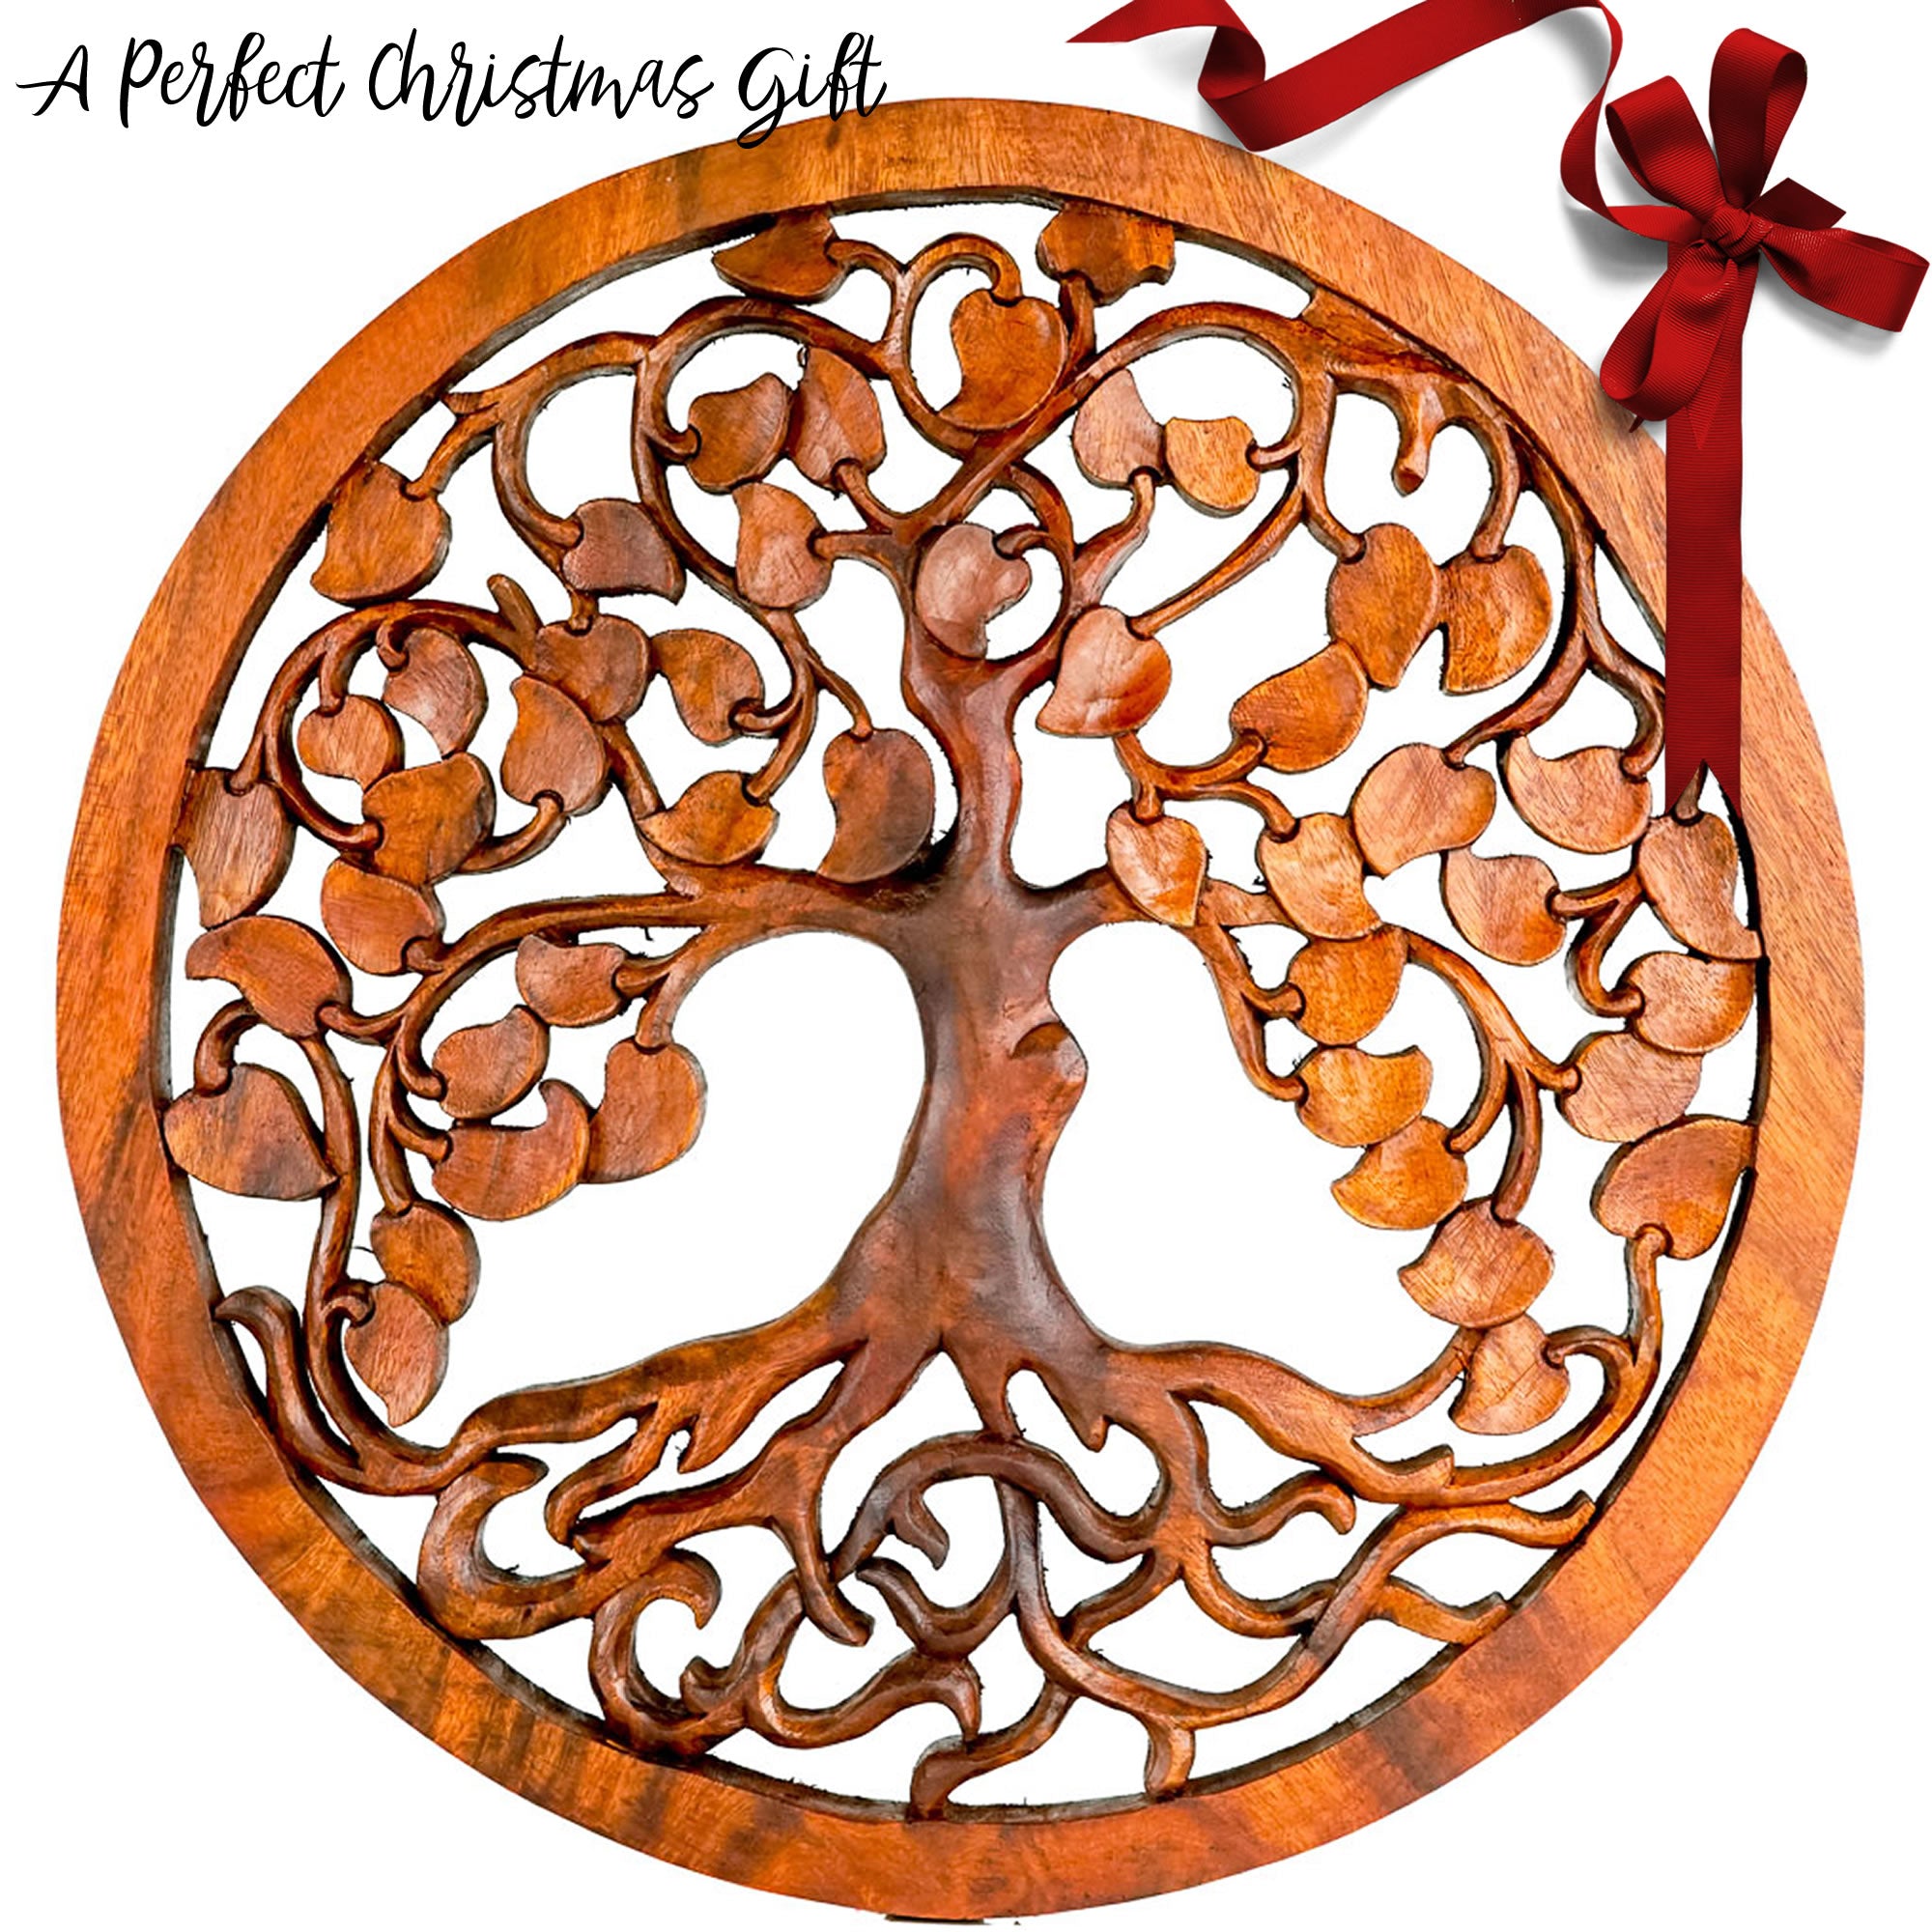 Hand Carved Wooden Decorative Panel Art Tree of Hope